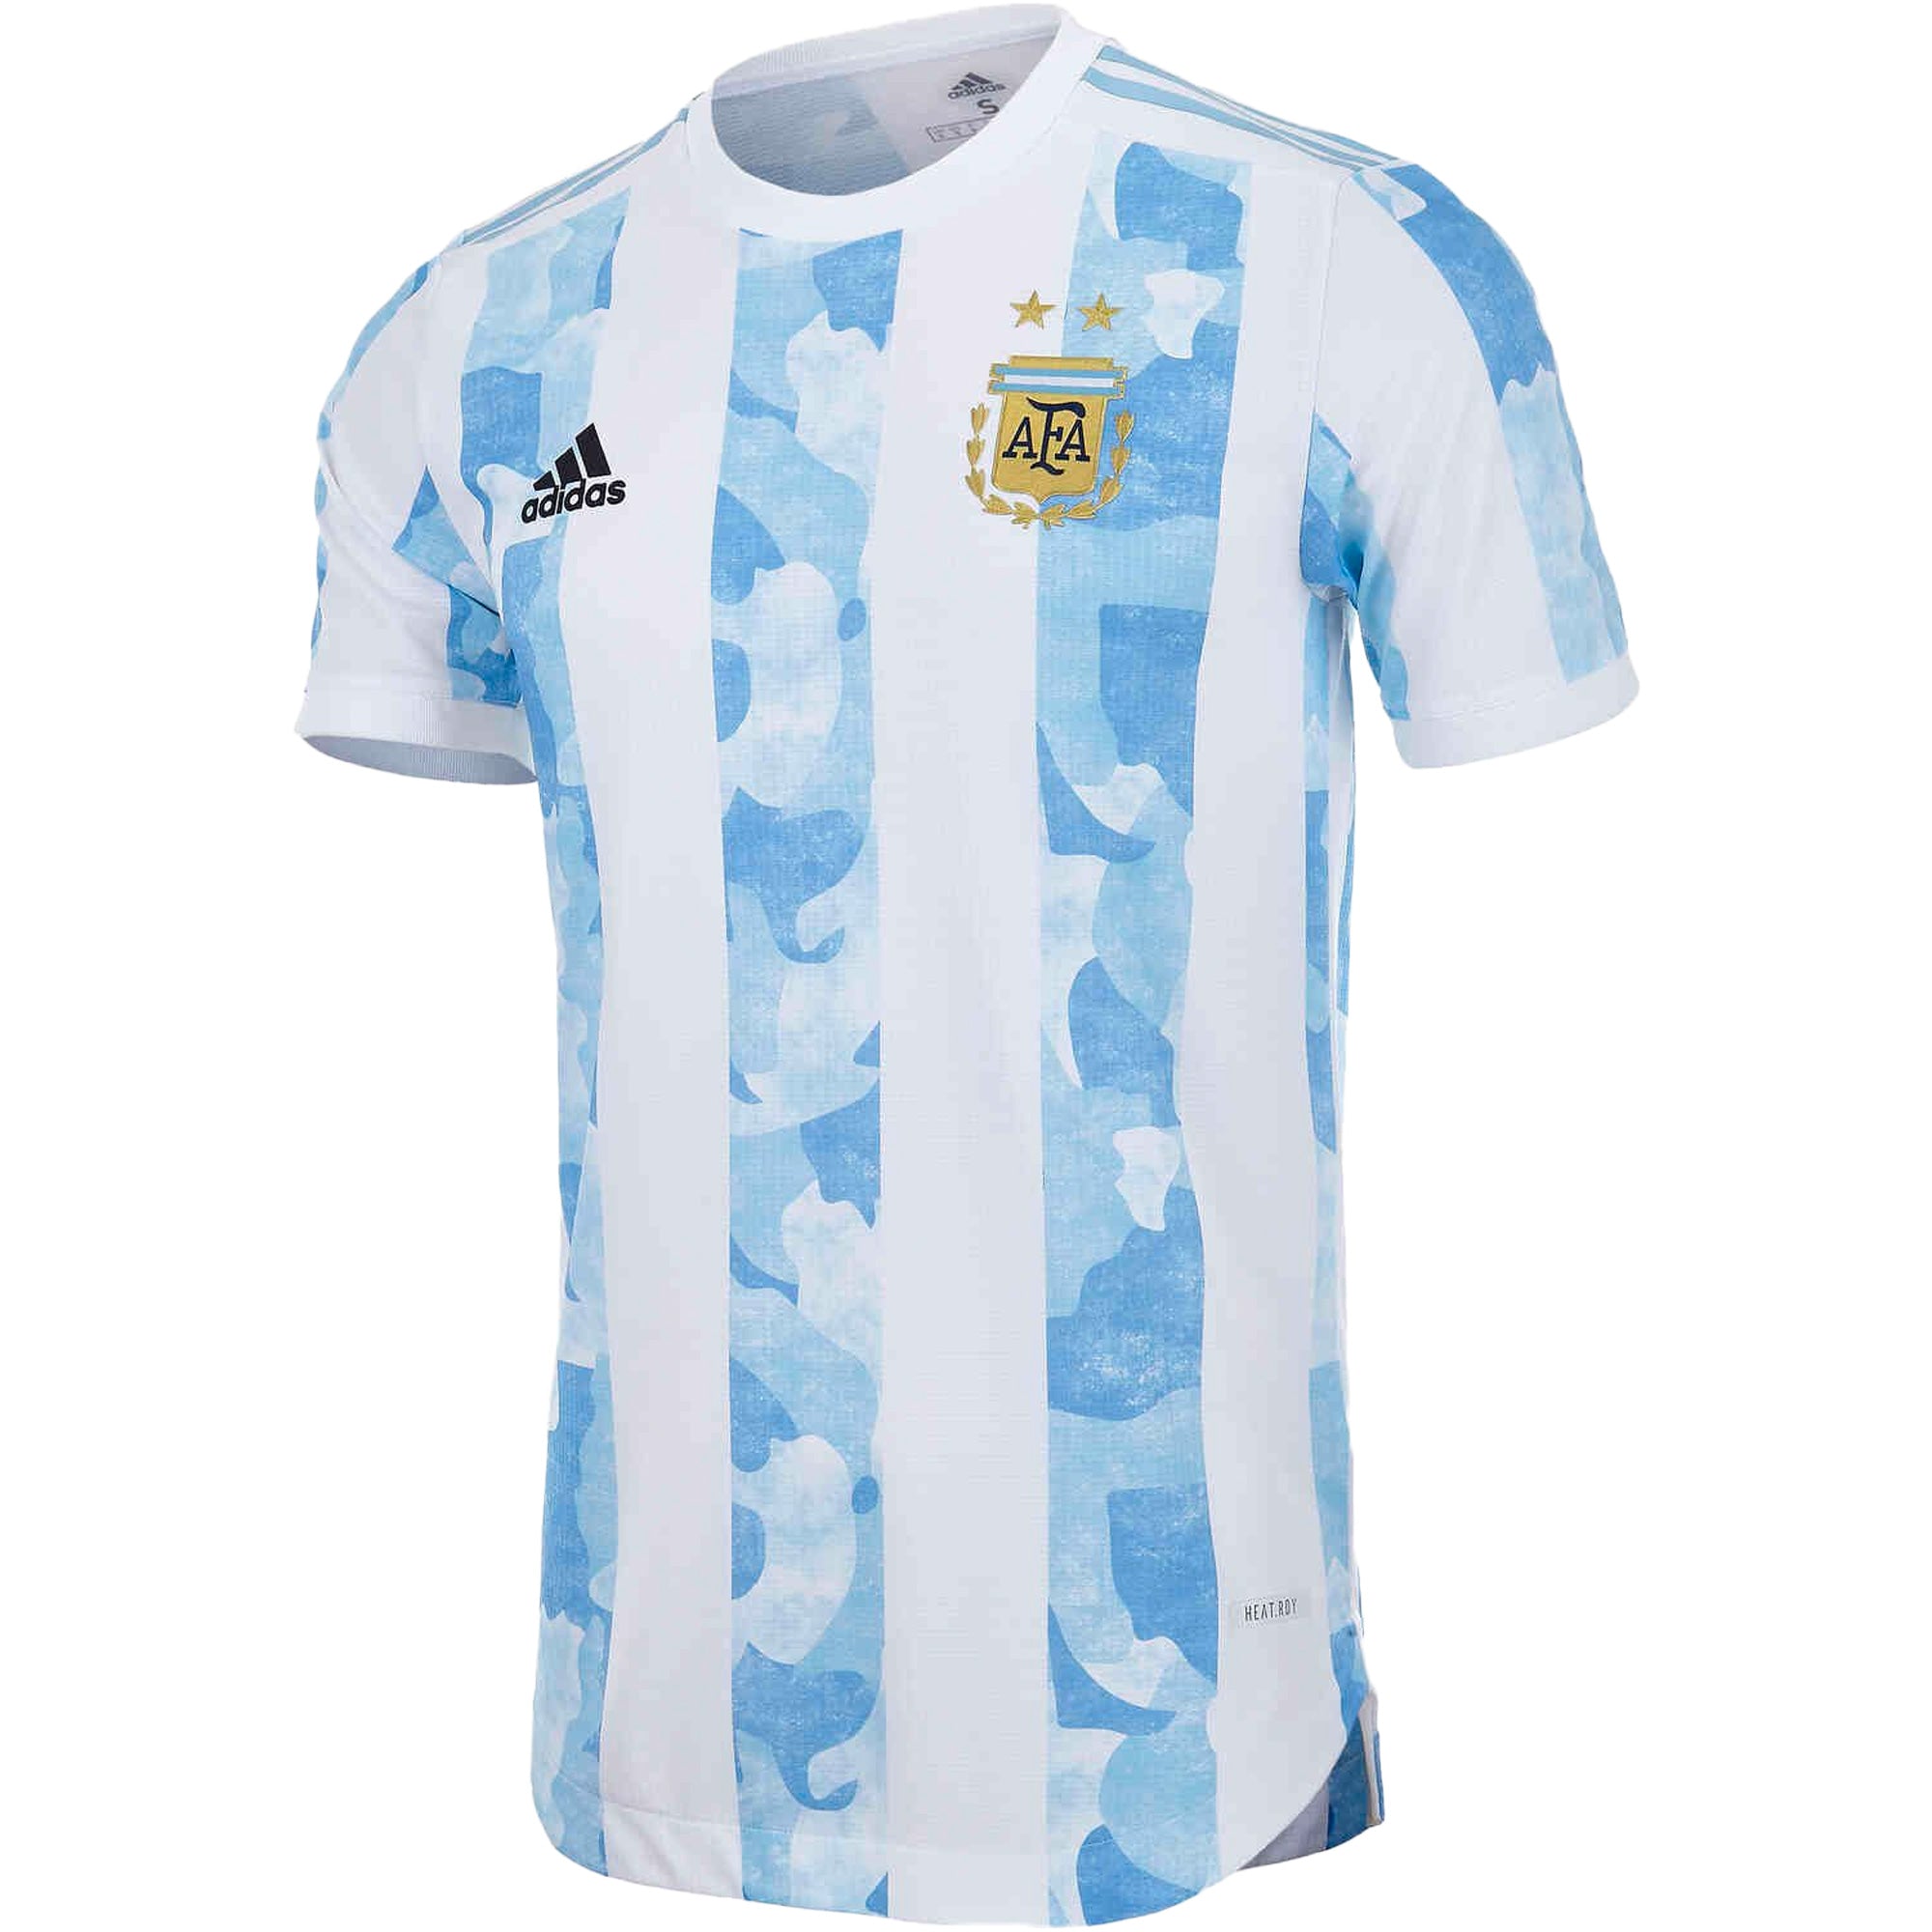 adidas Argentina 22 Home Authentic Jersey Men's